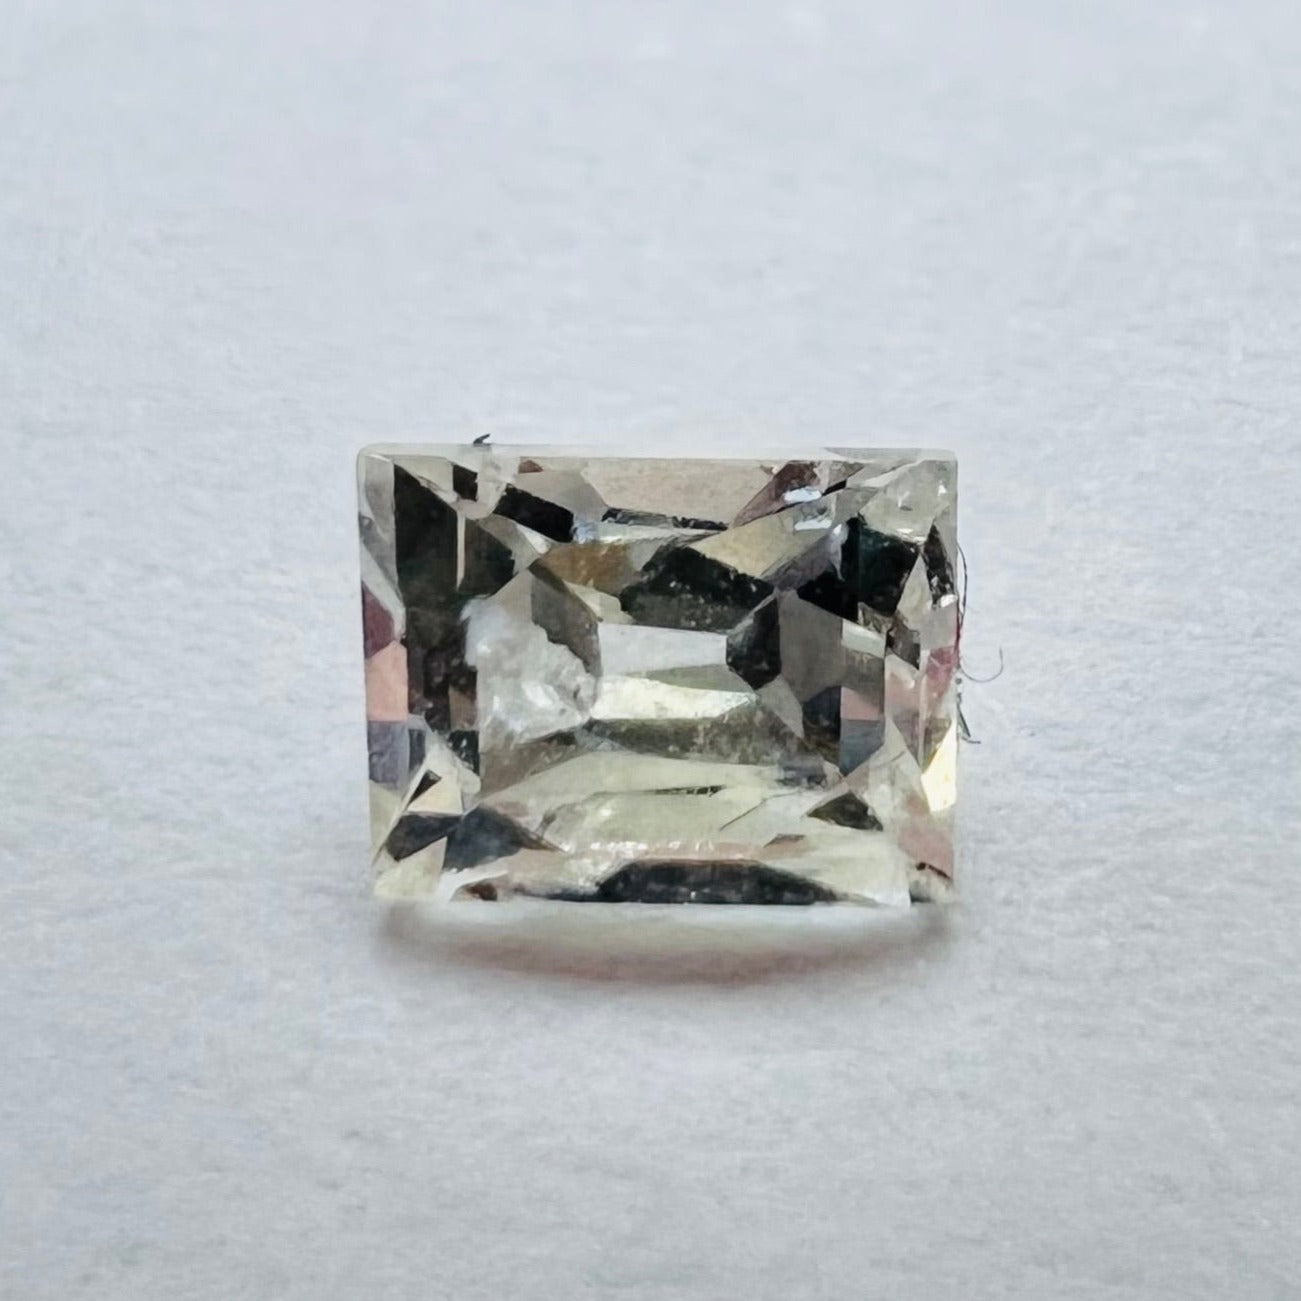 .32CT French Cut Diamond K I1 4.33x3.43x2.30mm Natural Earth mined